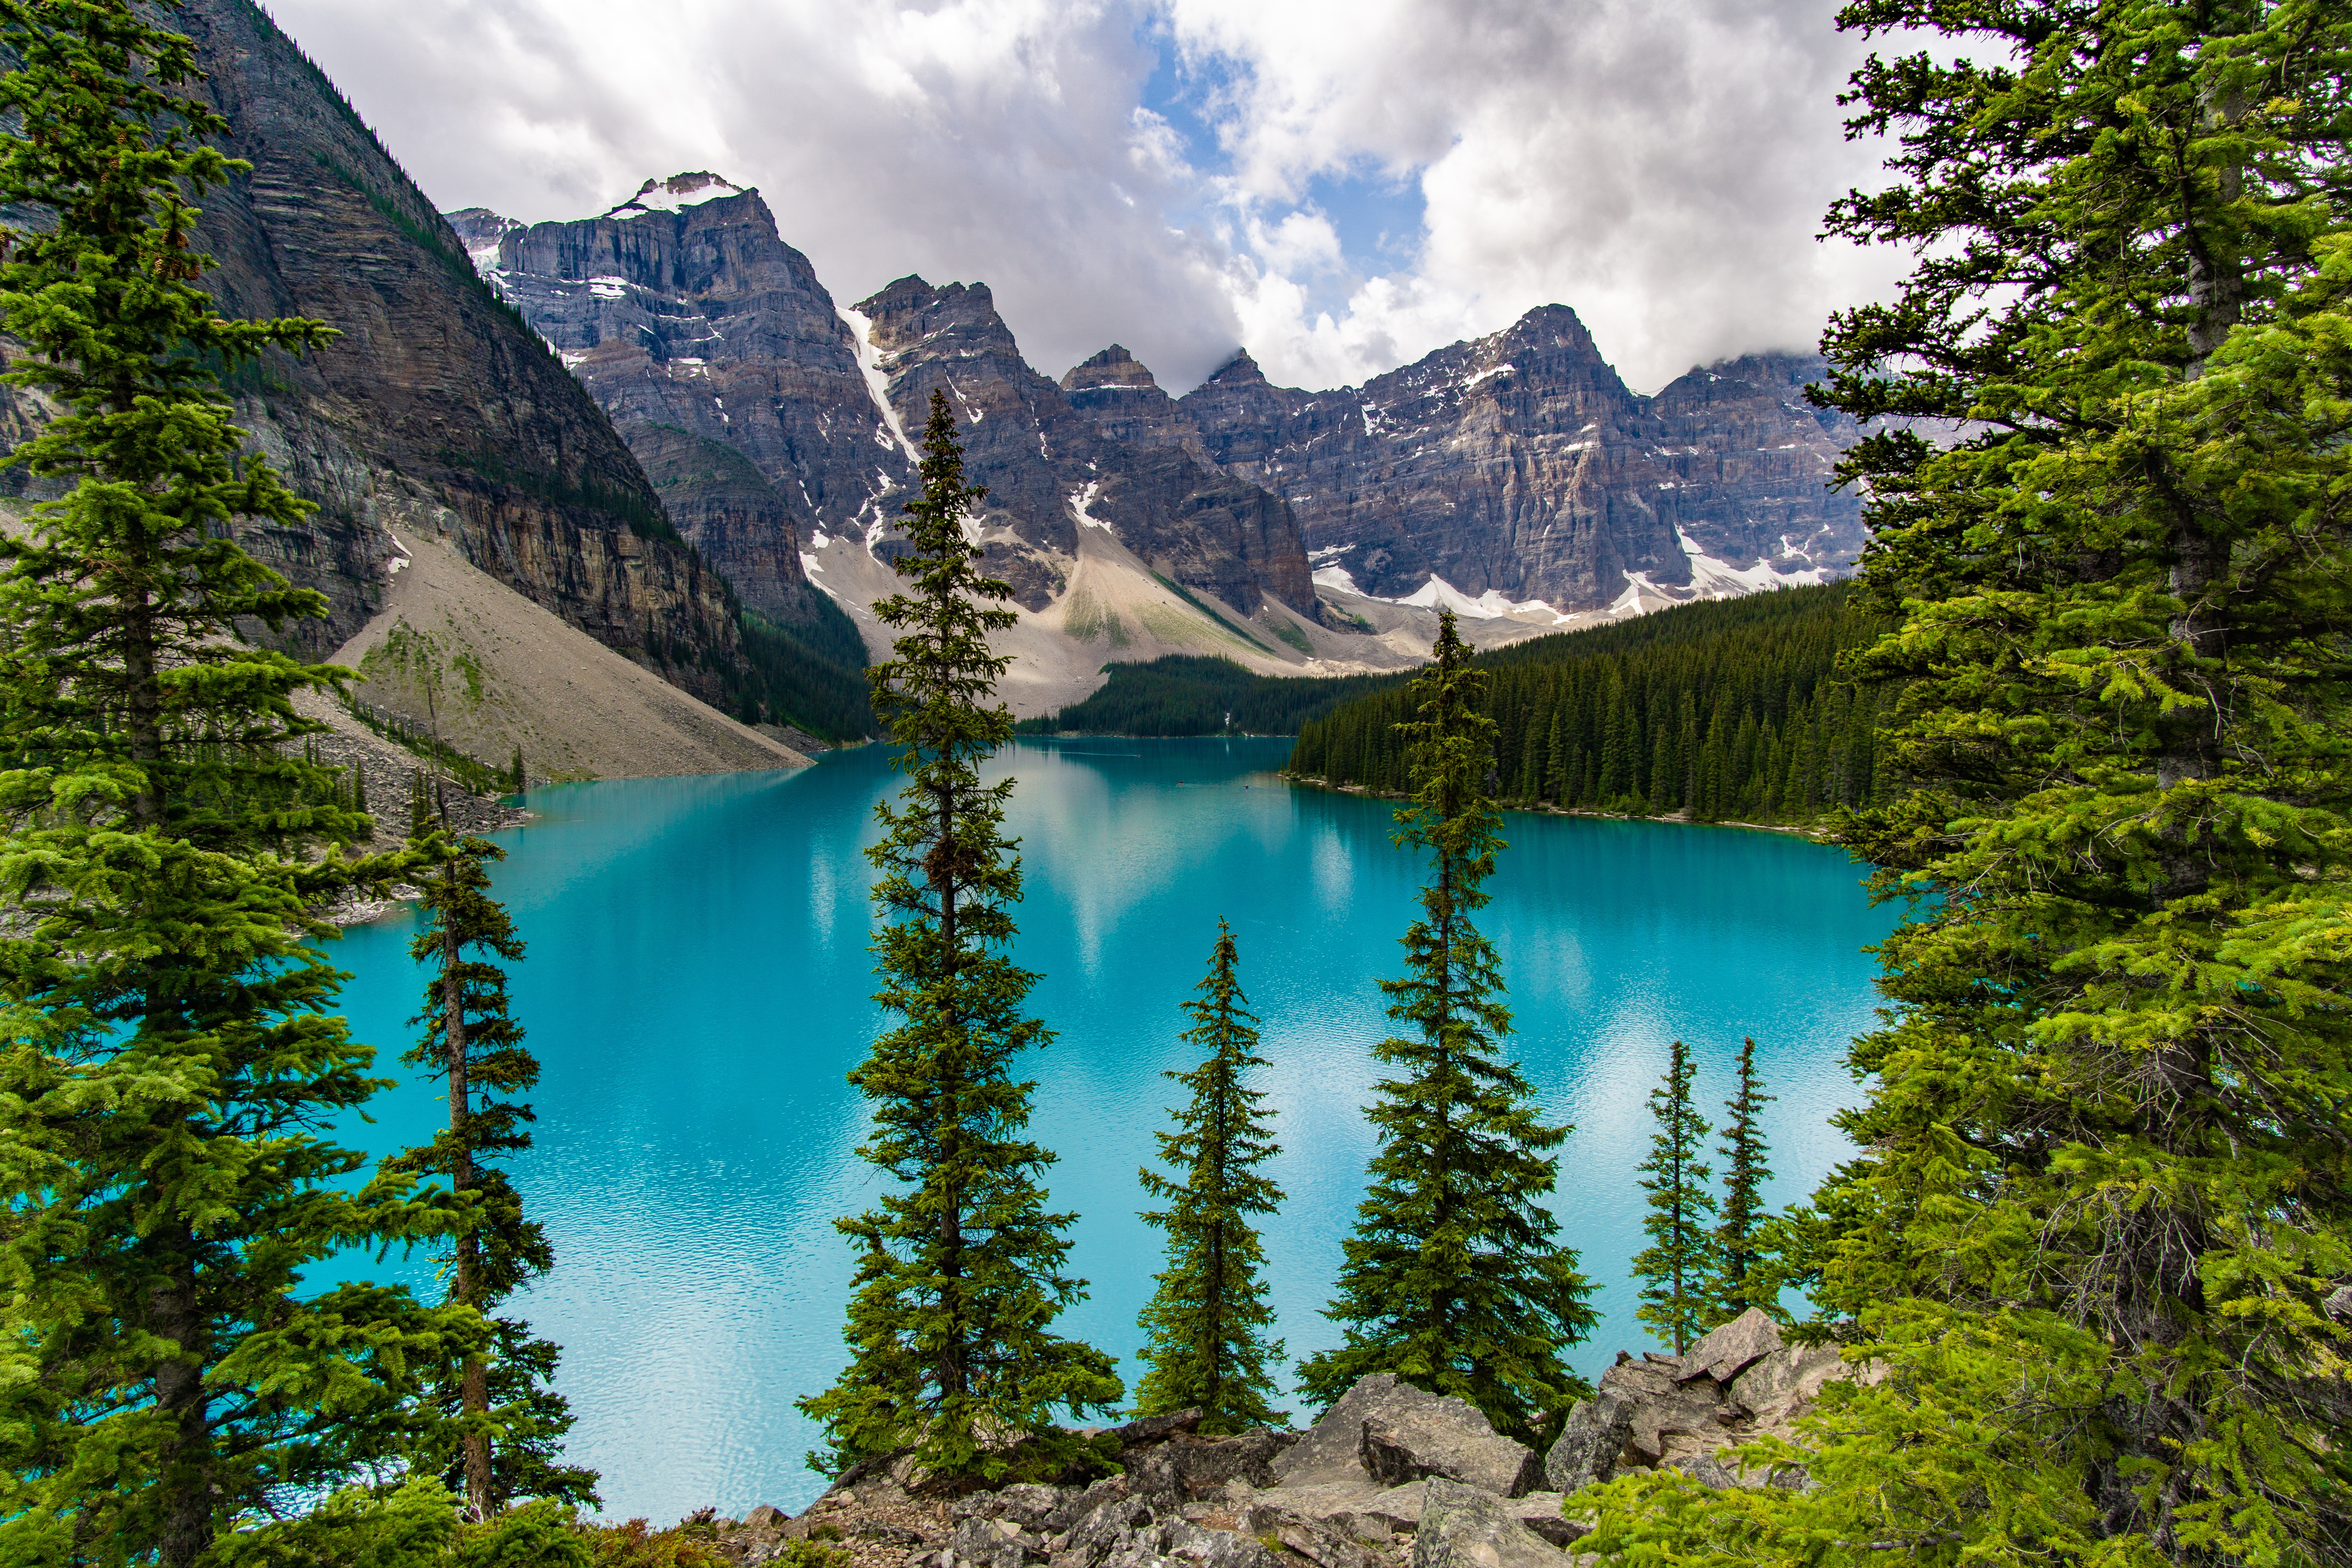 Banff + Lake Louise - Places I Would Like To Visit One Day - Communikait by Kait Hanson